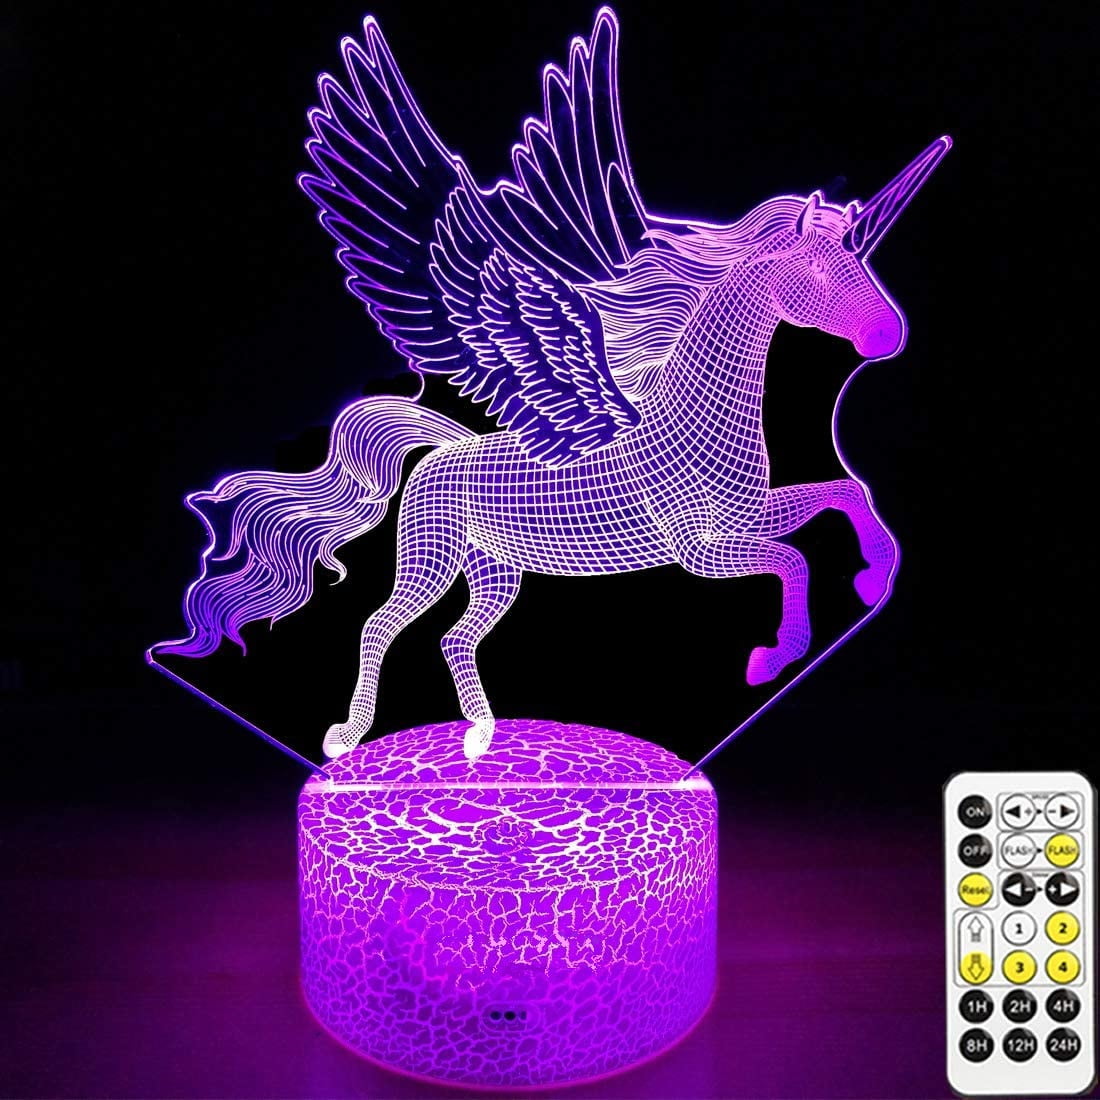 Unicorn LED Night Lights 16 Colors 3D Illusion Lamp Remote Control for Kids GIFT 